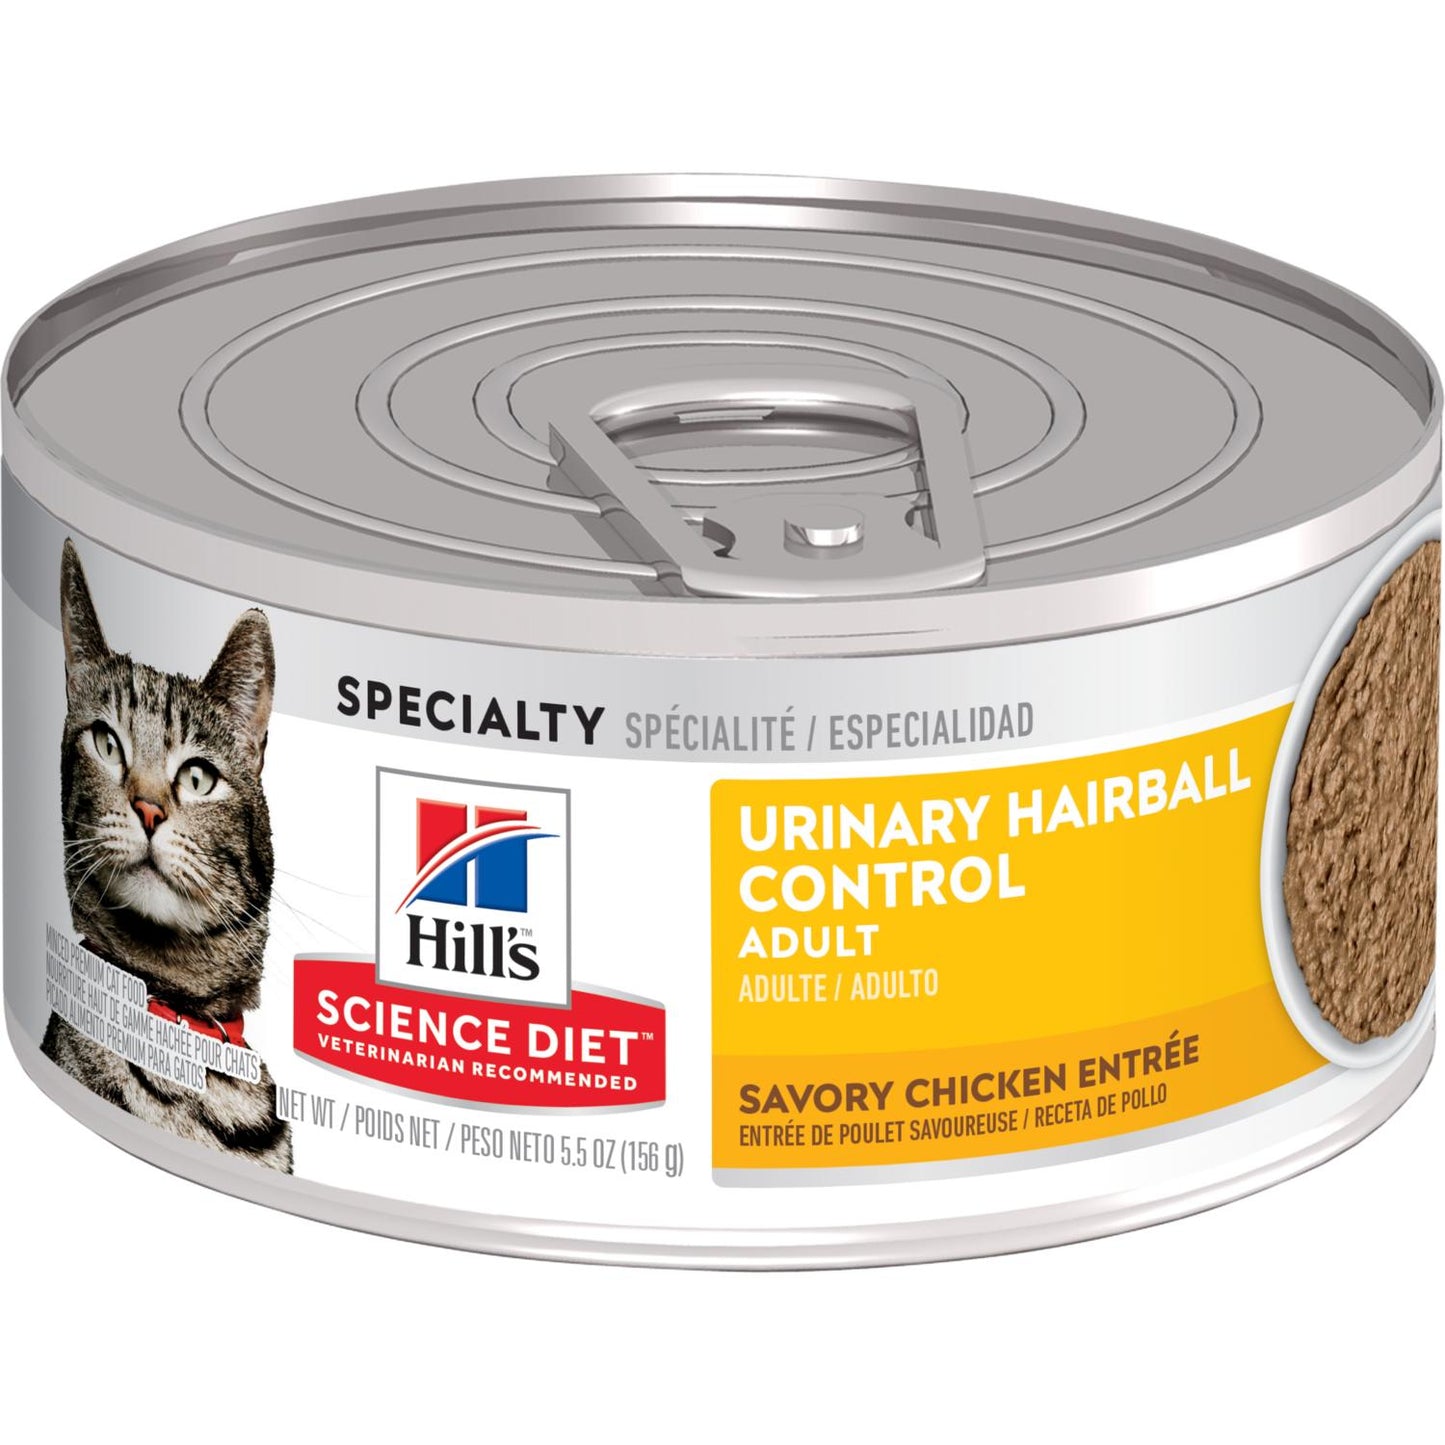 Hill's Science Diet Adult Urinary Hairball Control Savory Chicken Entrée cat food  Canned Cat Food  | PetMax Canada